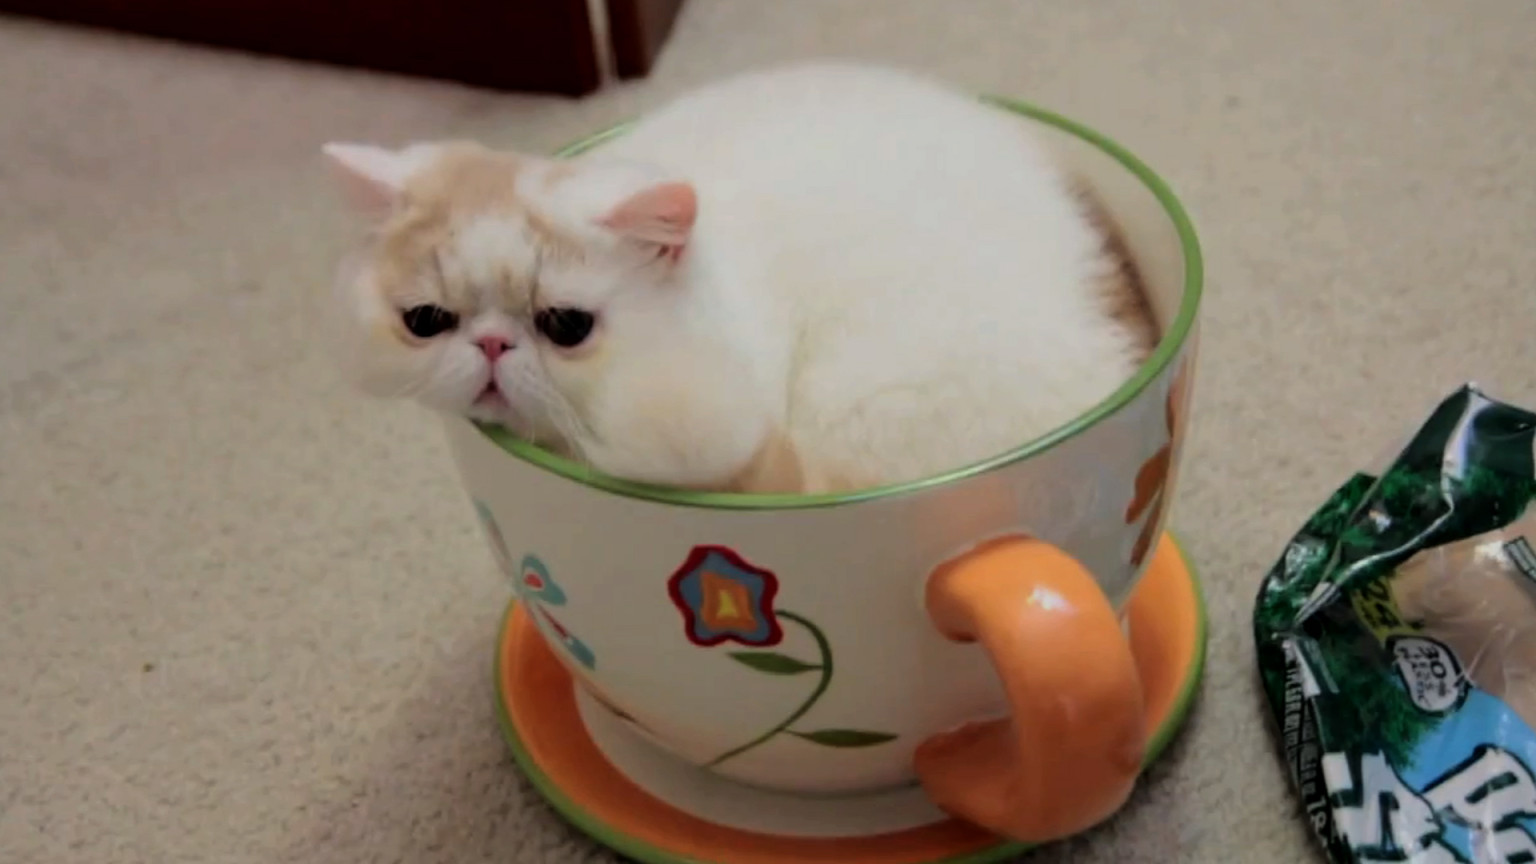 If It Fits, I Sits: A Supercut Of Animals Sitting In Small Spaces